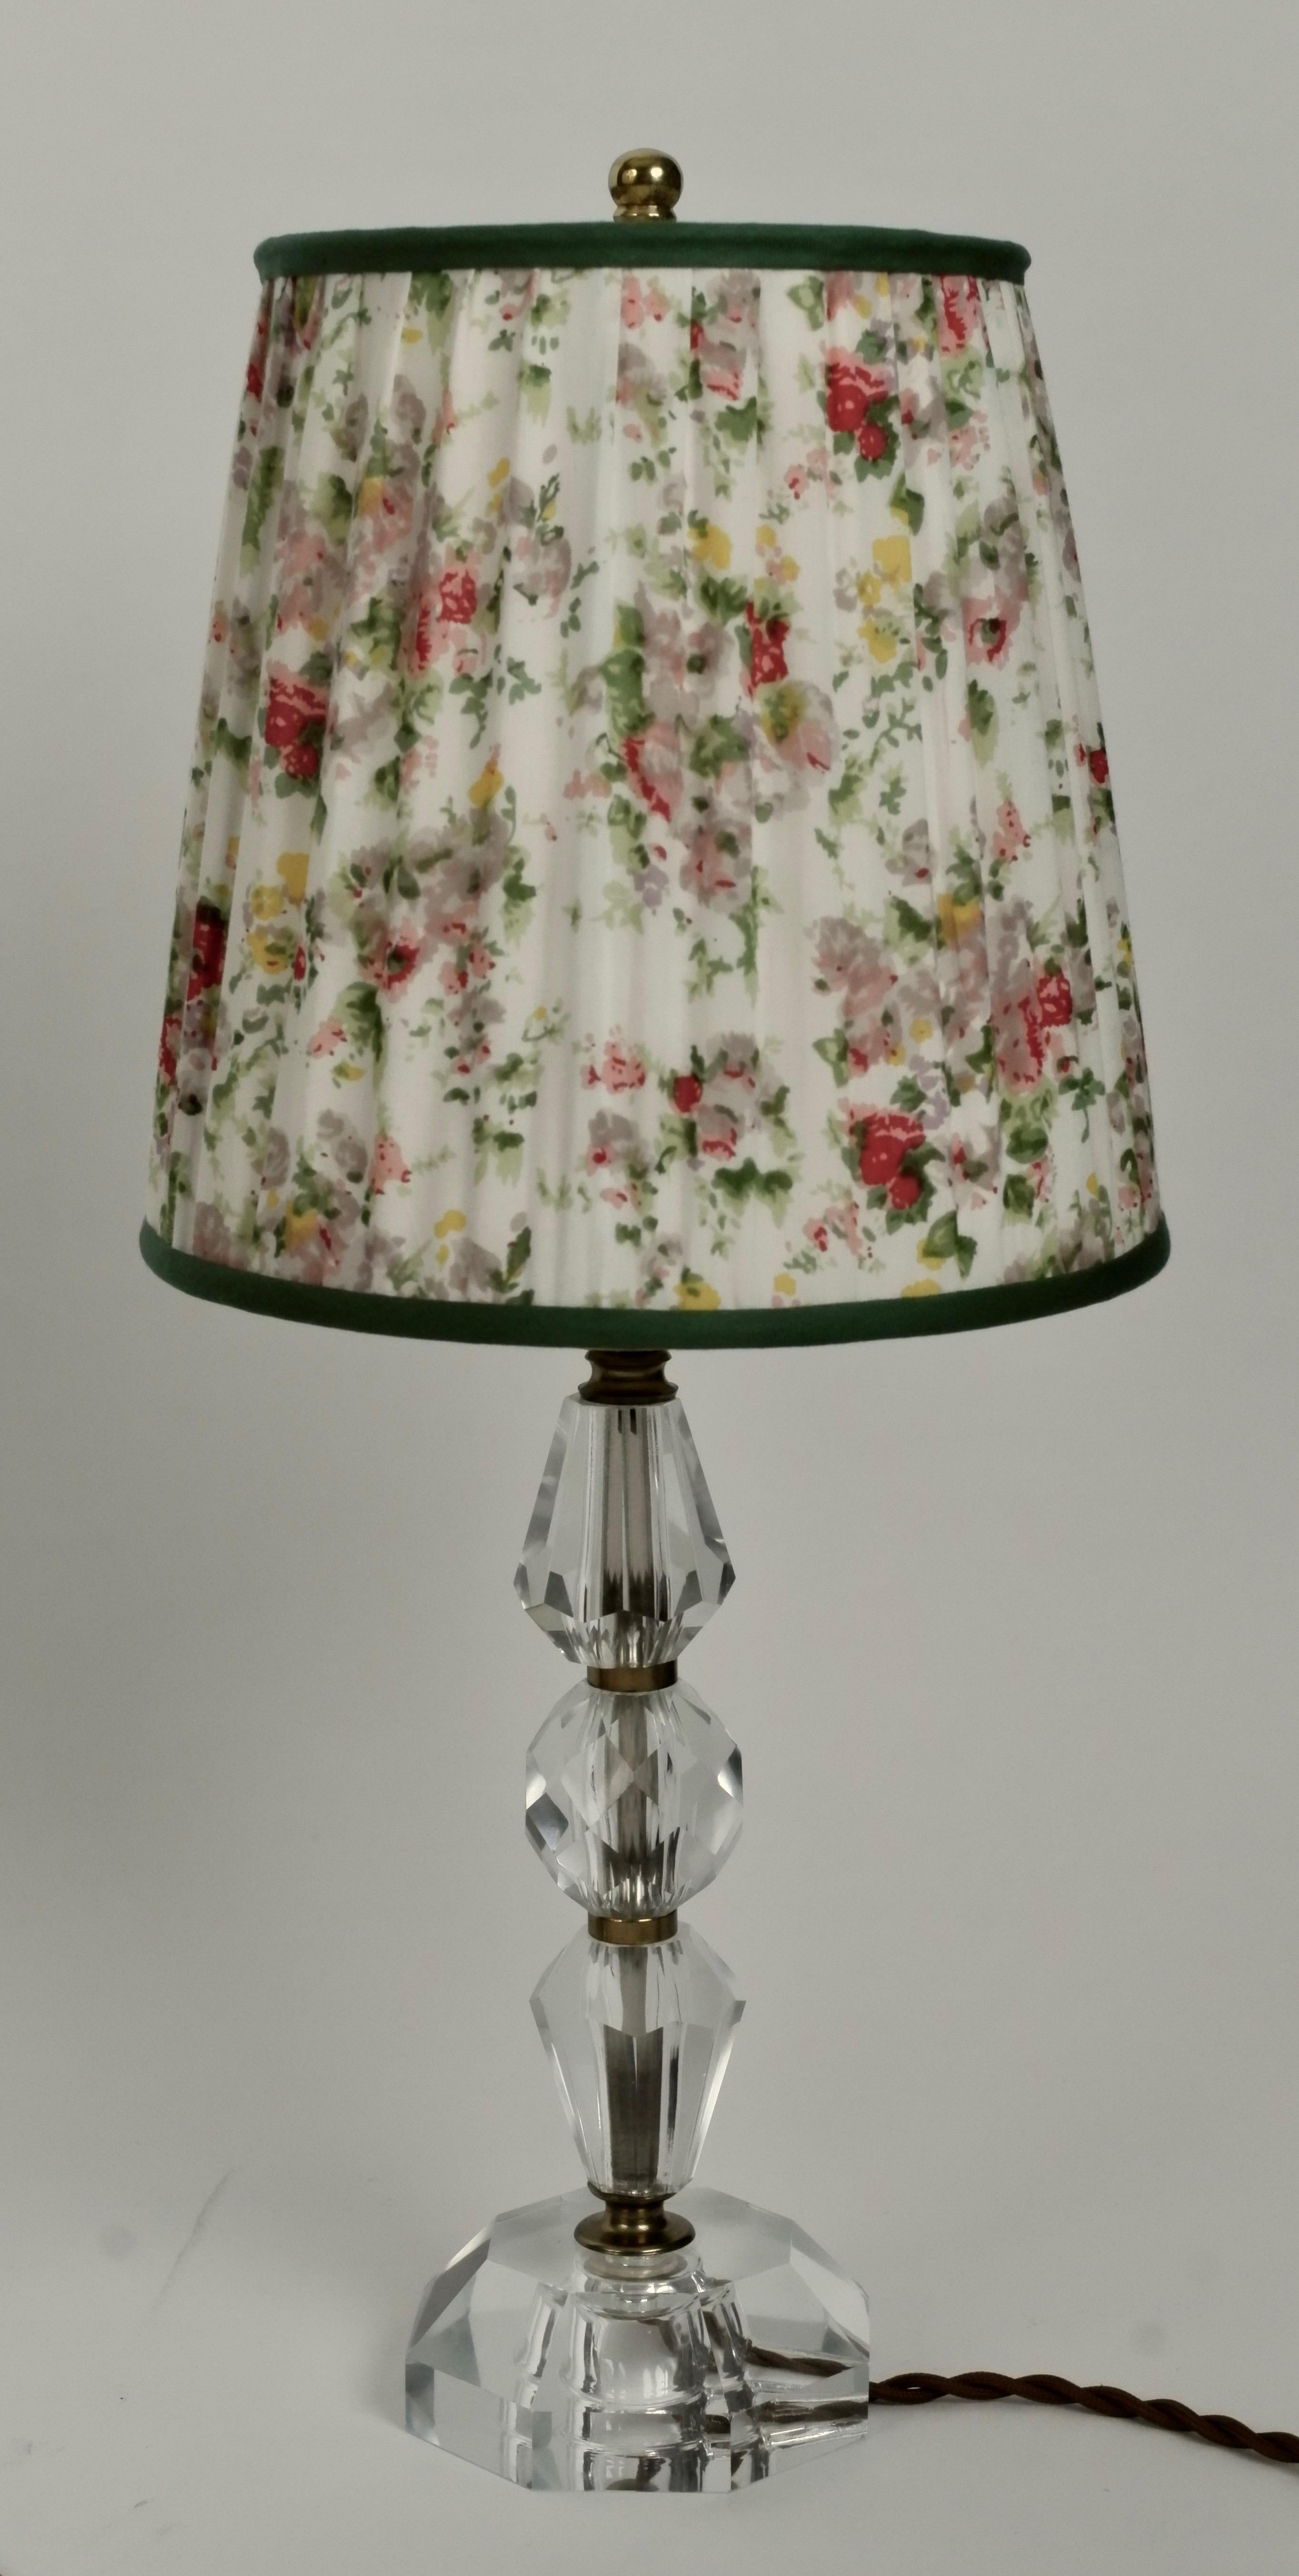 A beautiful cut glass lamp from France. The shade is covered with a vintage silk textile ,using the original frame.
The woven textile cable adds a contrast to the glass.